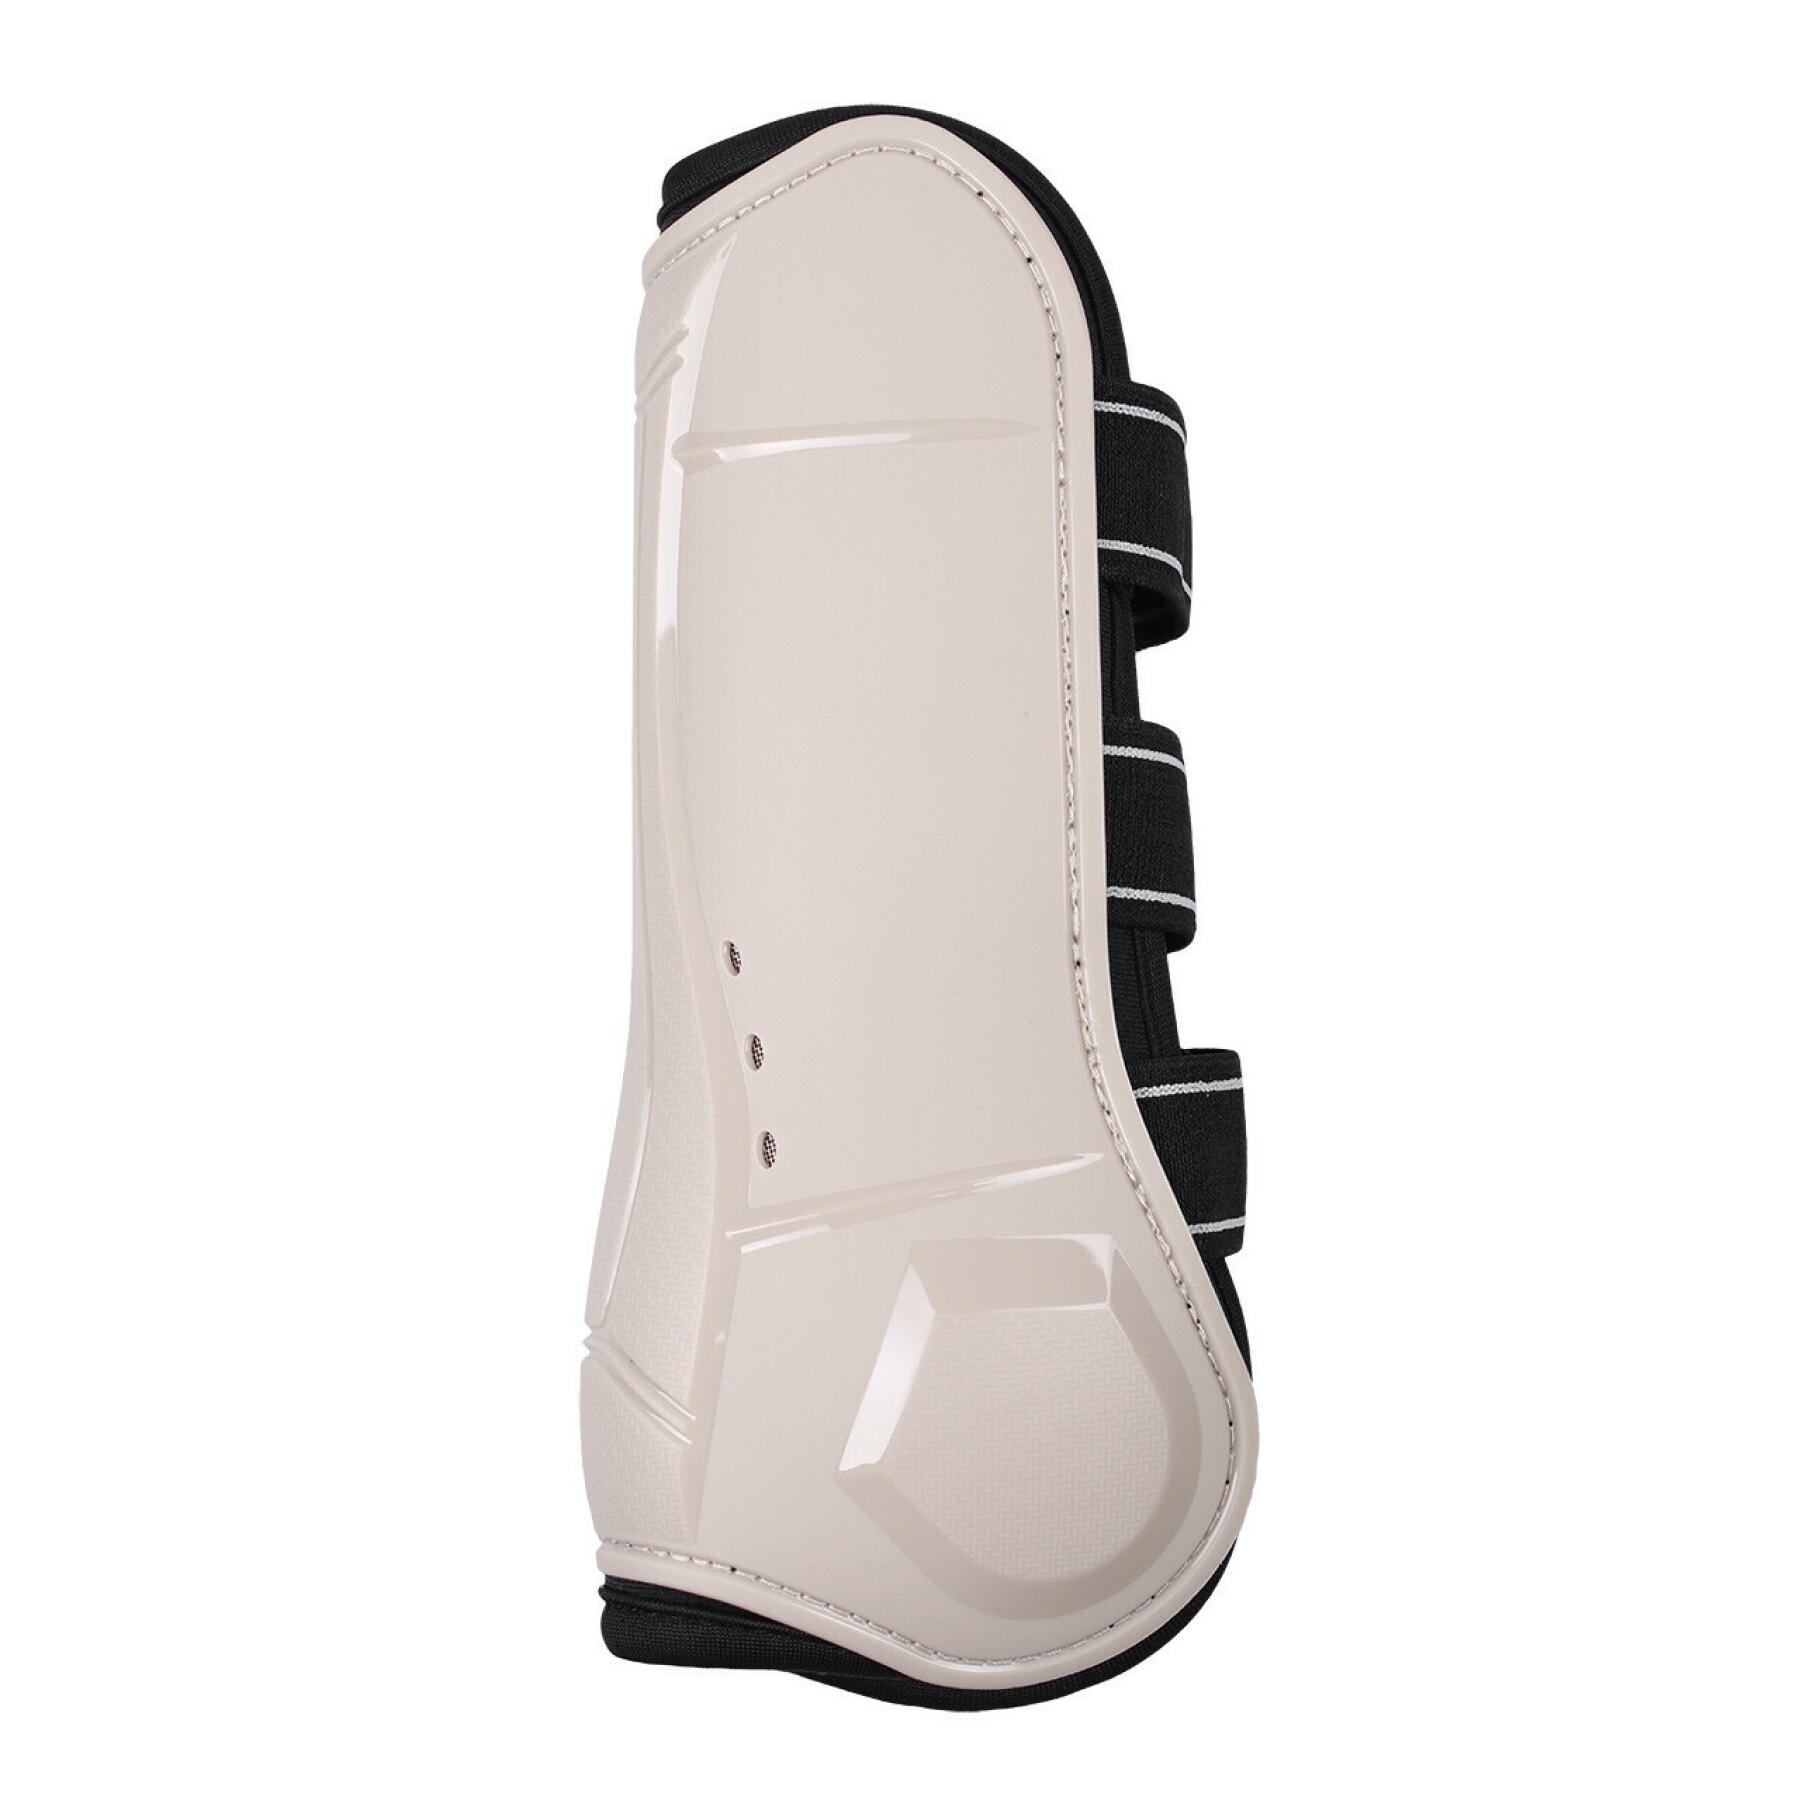 Tendon protector for horses QHP champion